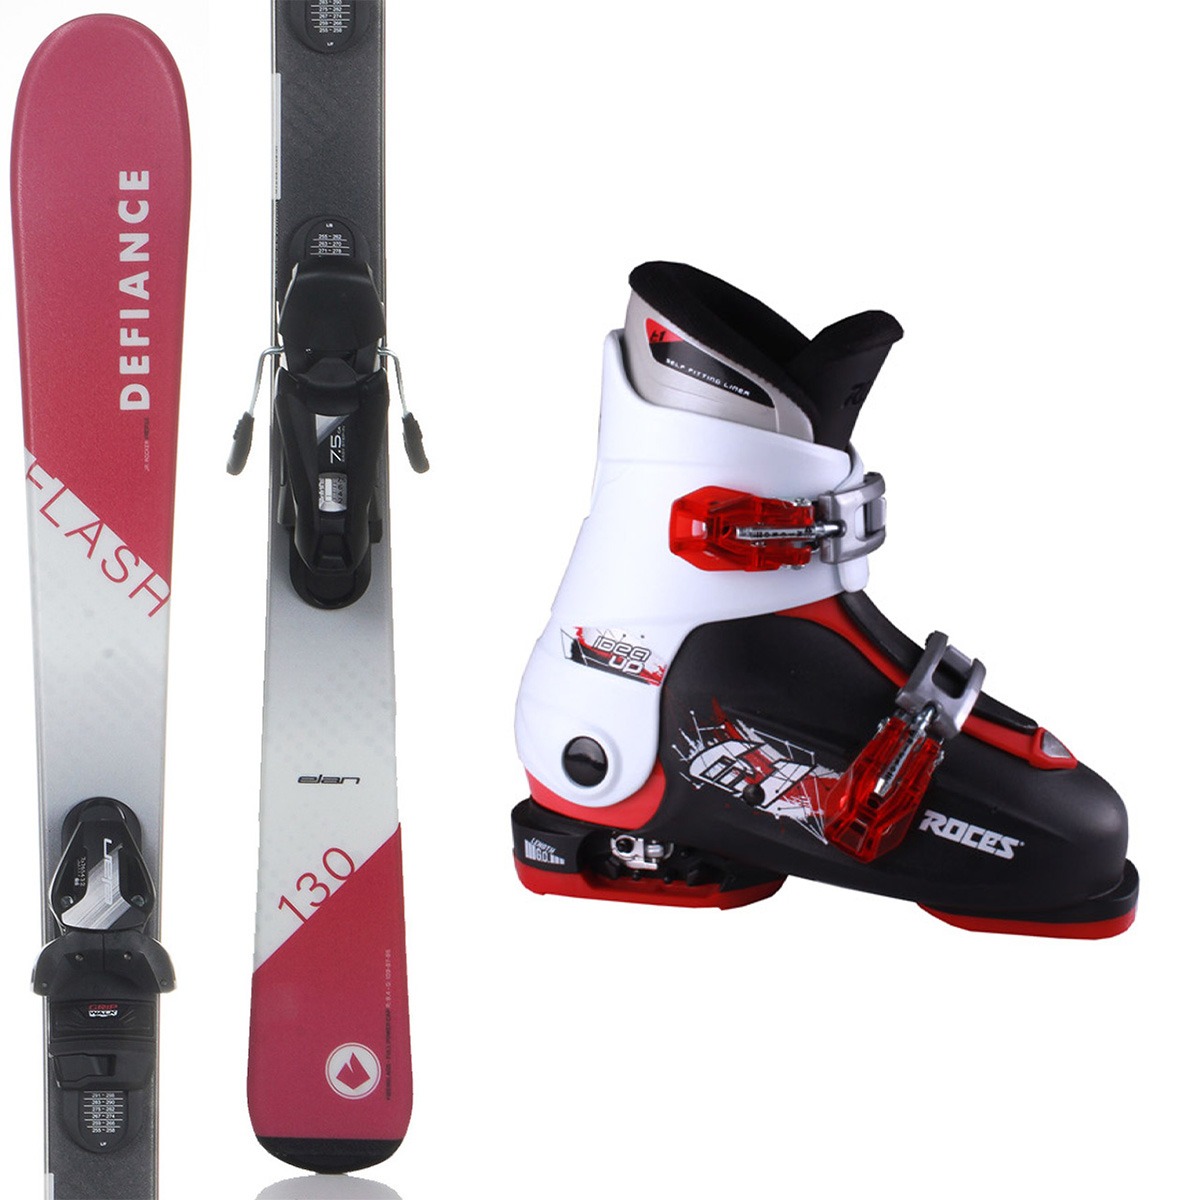 Roces red ski package